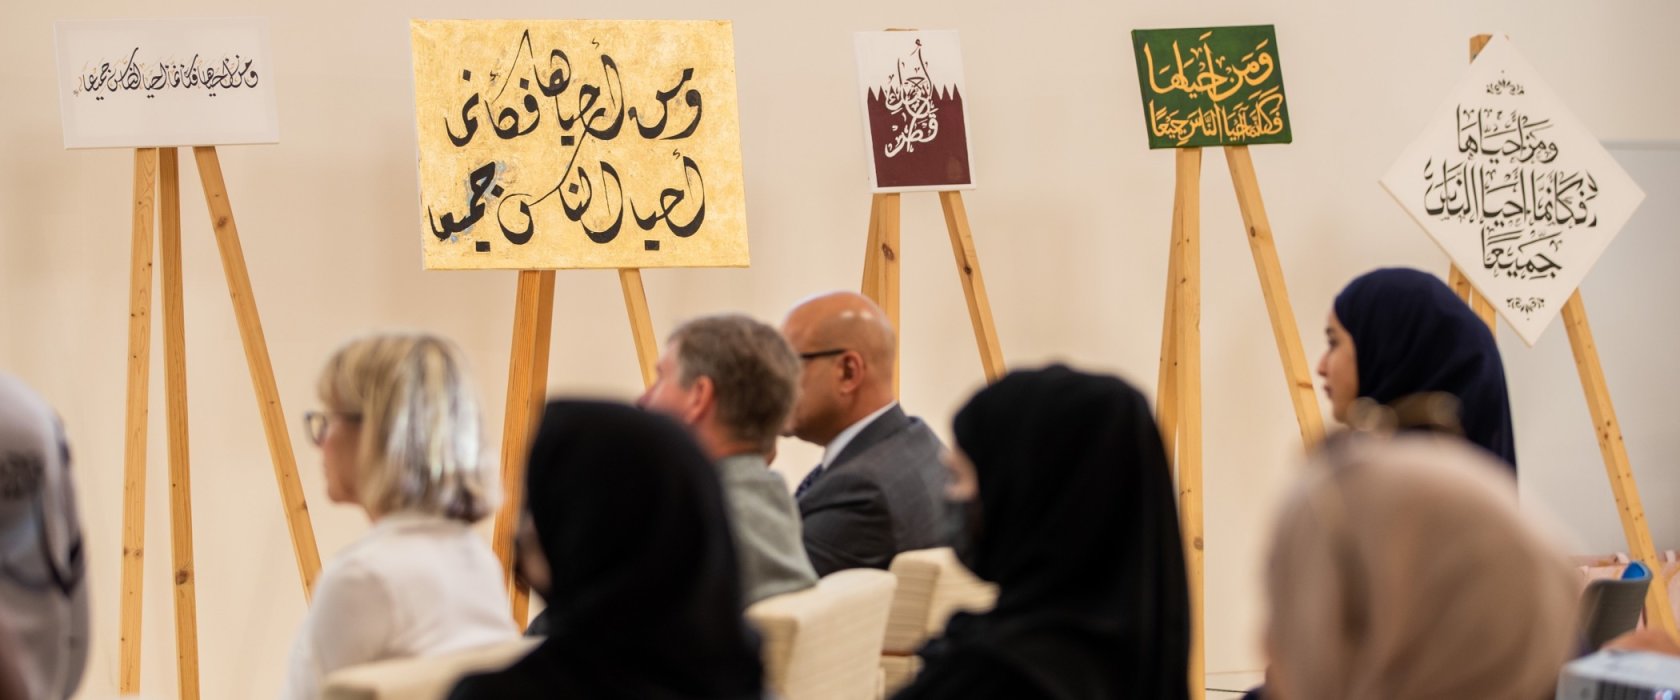 “I feel very connected with the calligraphy of Qur’anic scripture on the building,” says Education City Mosque calligraphy competitor